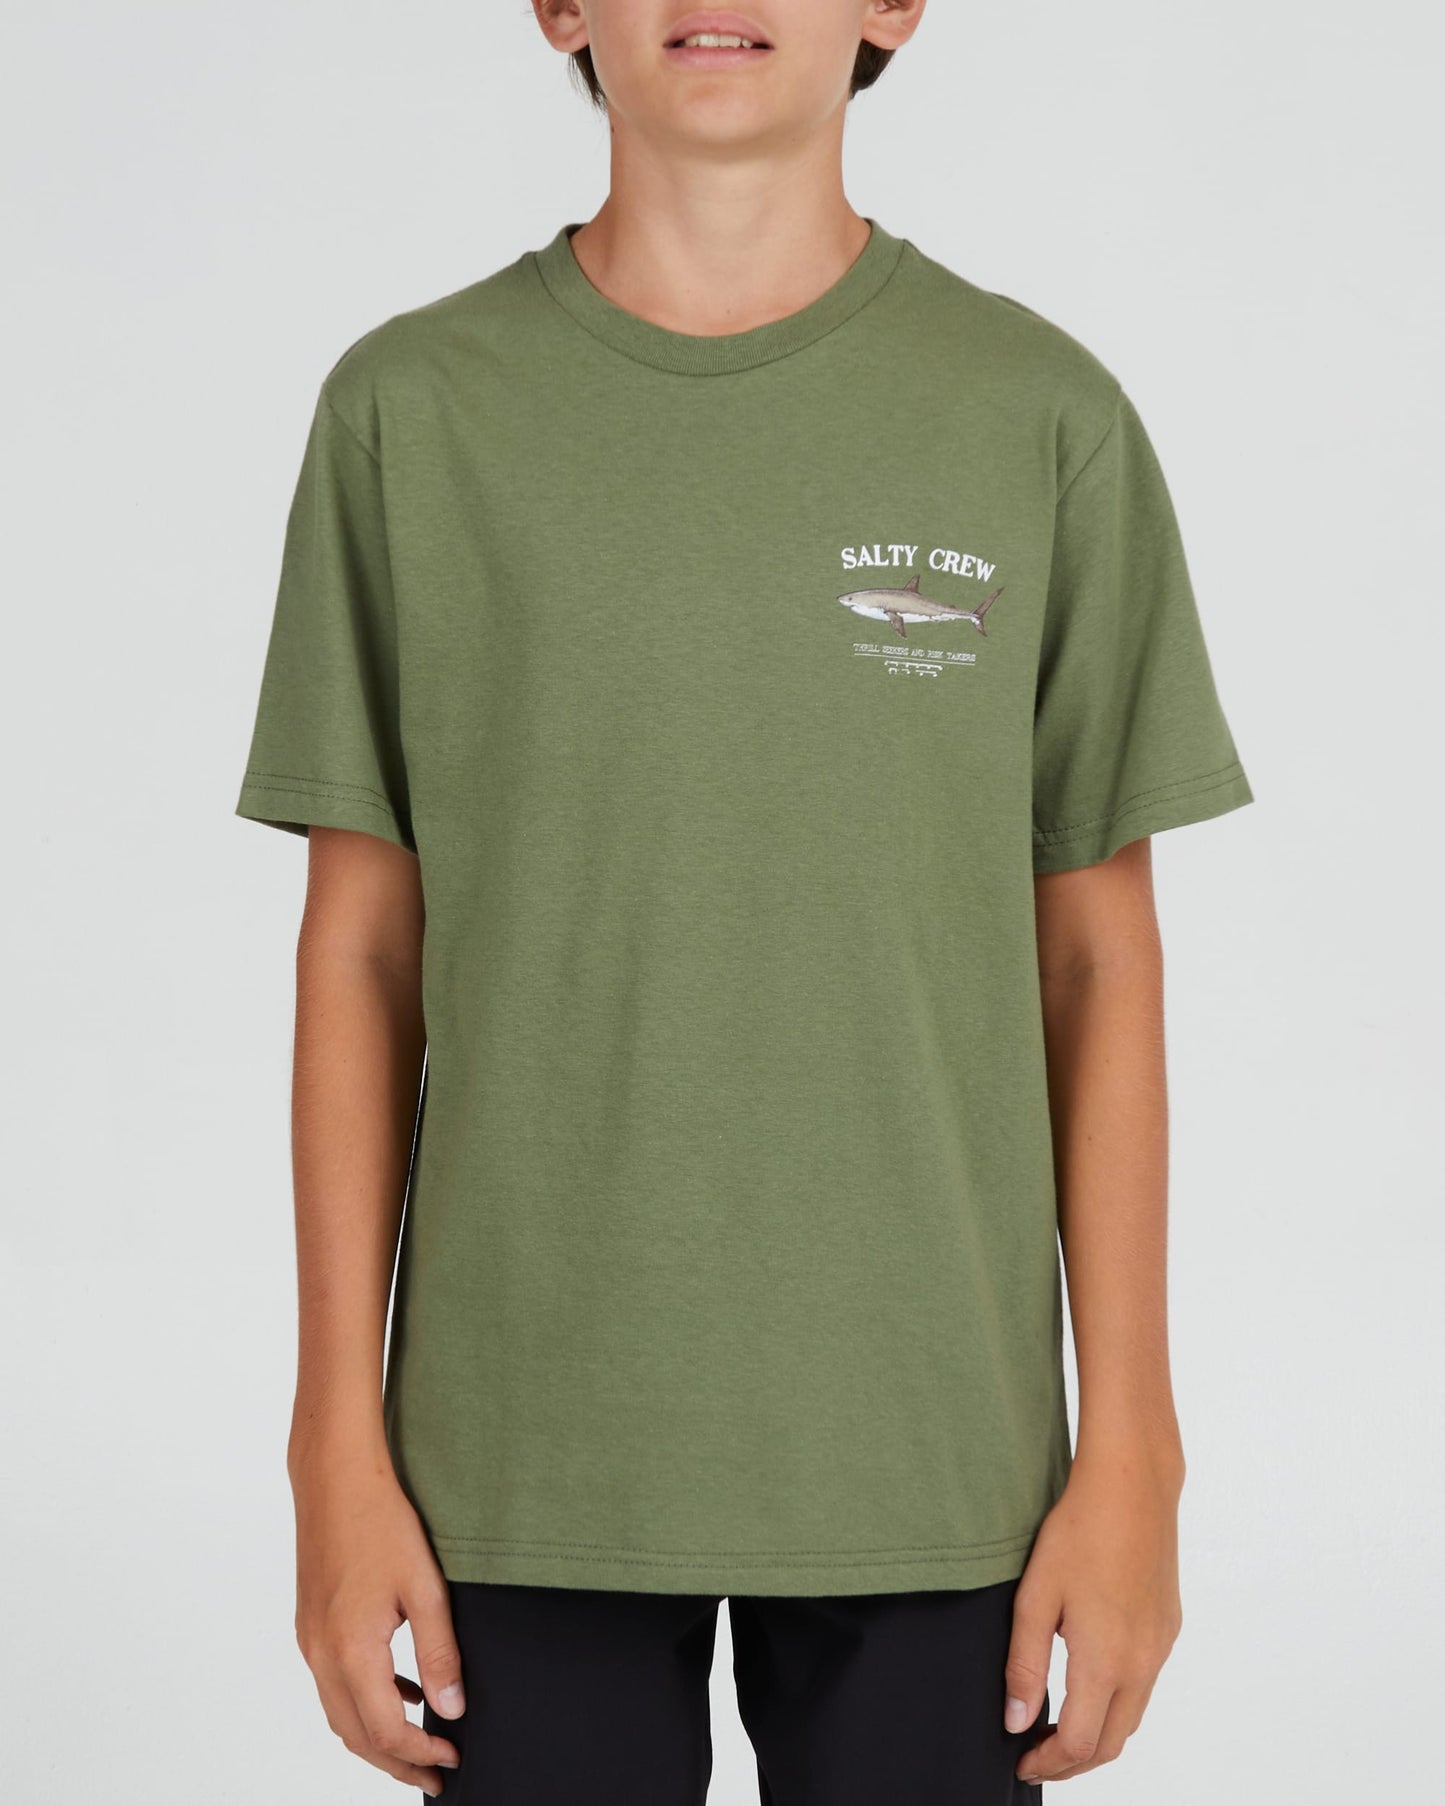 Salty crew T-SHIRTS S/S Bruce Boys S/S Tee - Sage green in Sage green